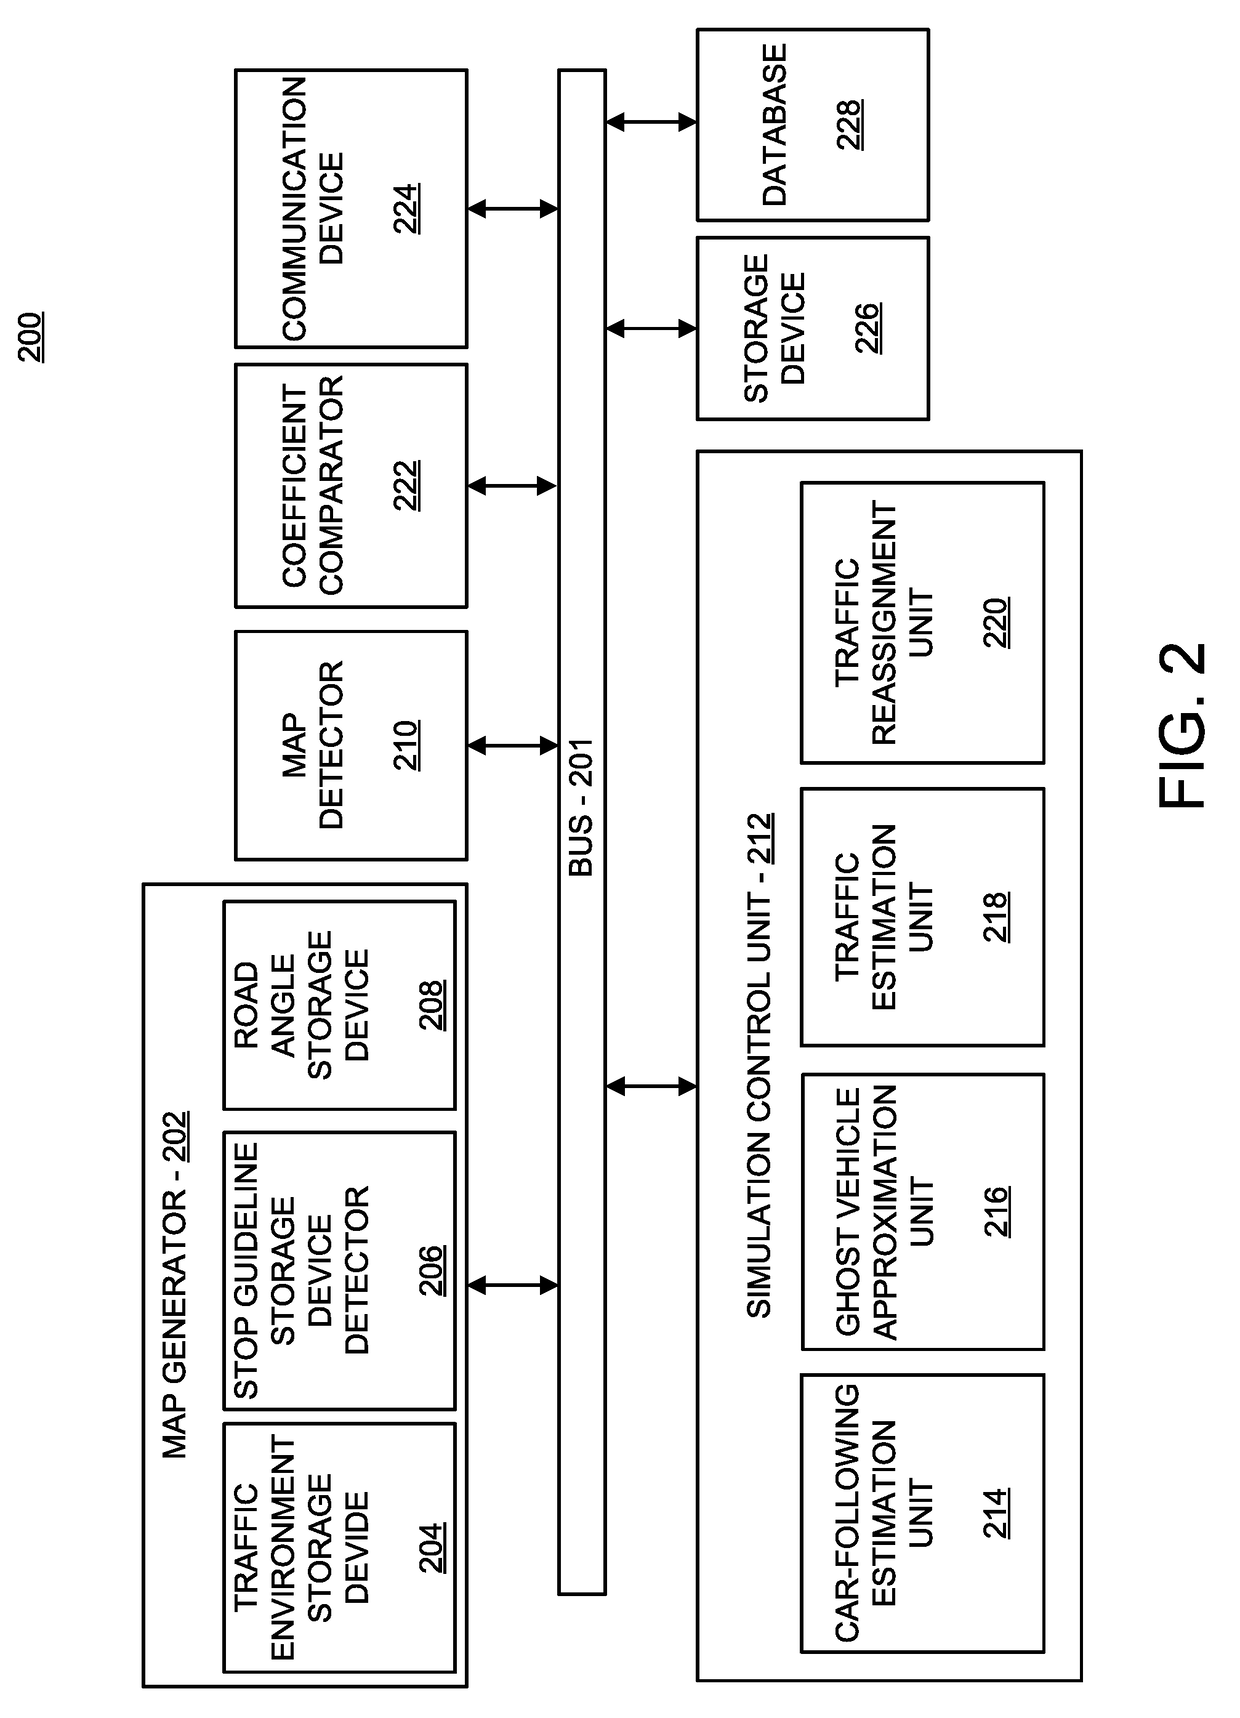 System and method for simulating traffic flow distributions with approximated vehicle behavior near intersections